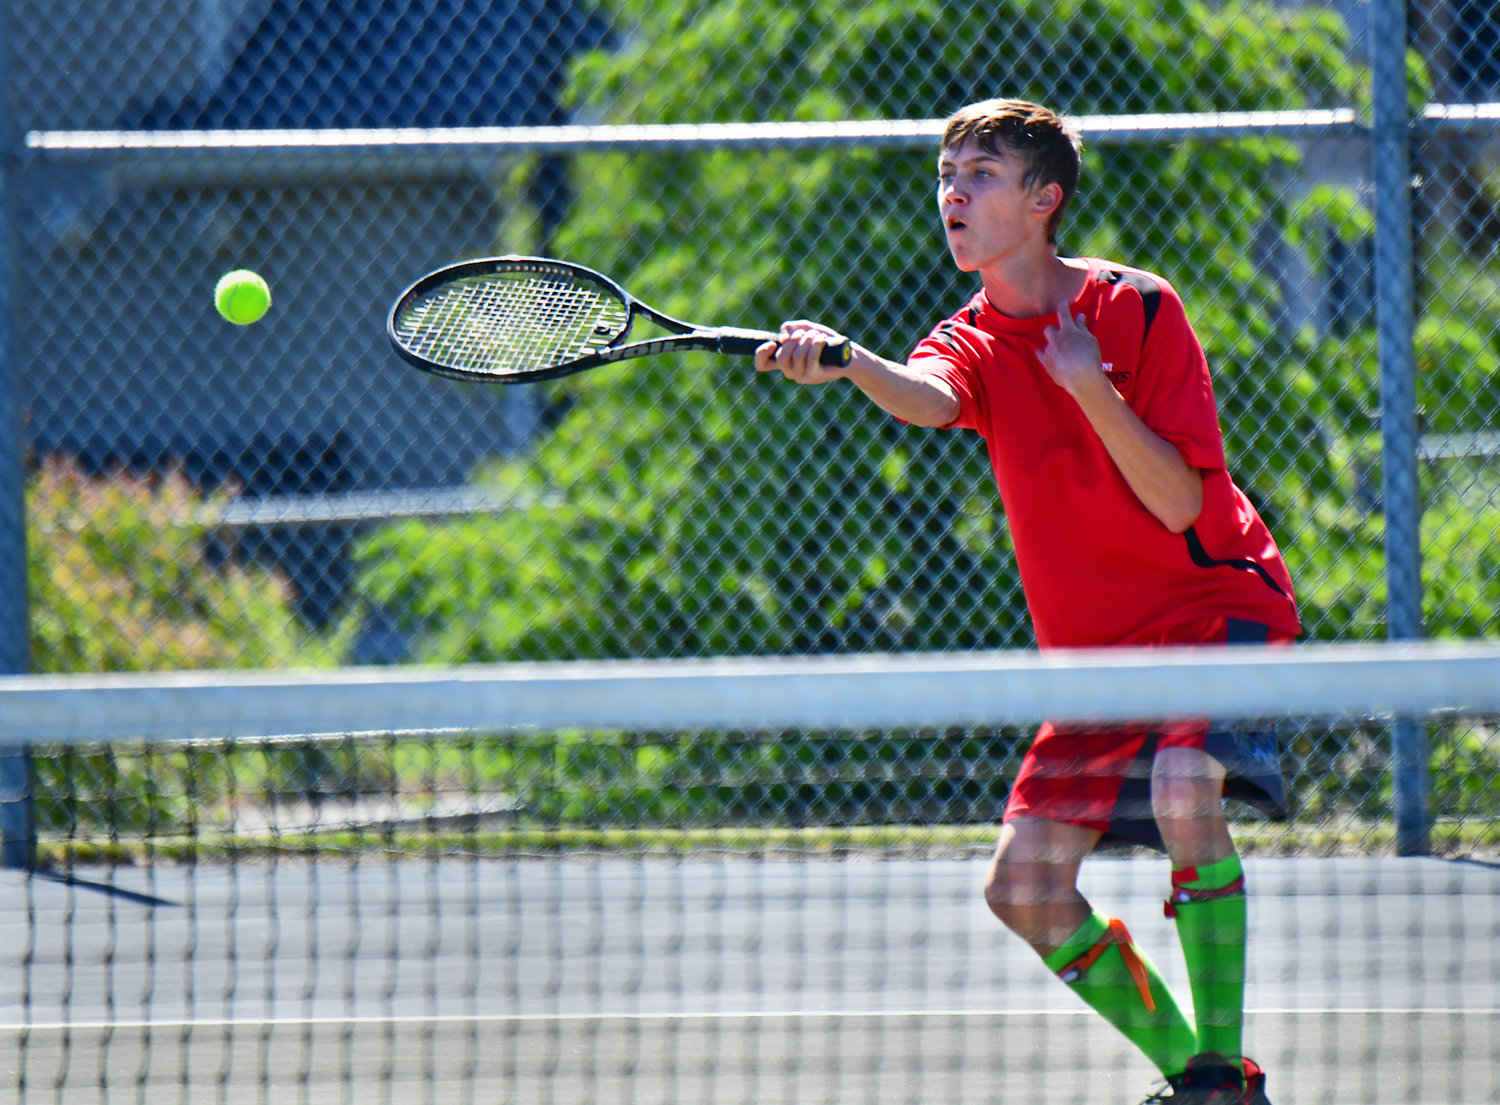 Yelm High School No. 2 boys tennis player Jacob Hensley drops a shot over the net during his match against his opponent from River Ridge High School on Wednesday, June 2, in Lacey.